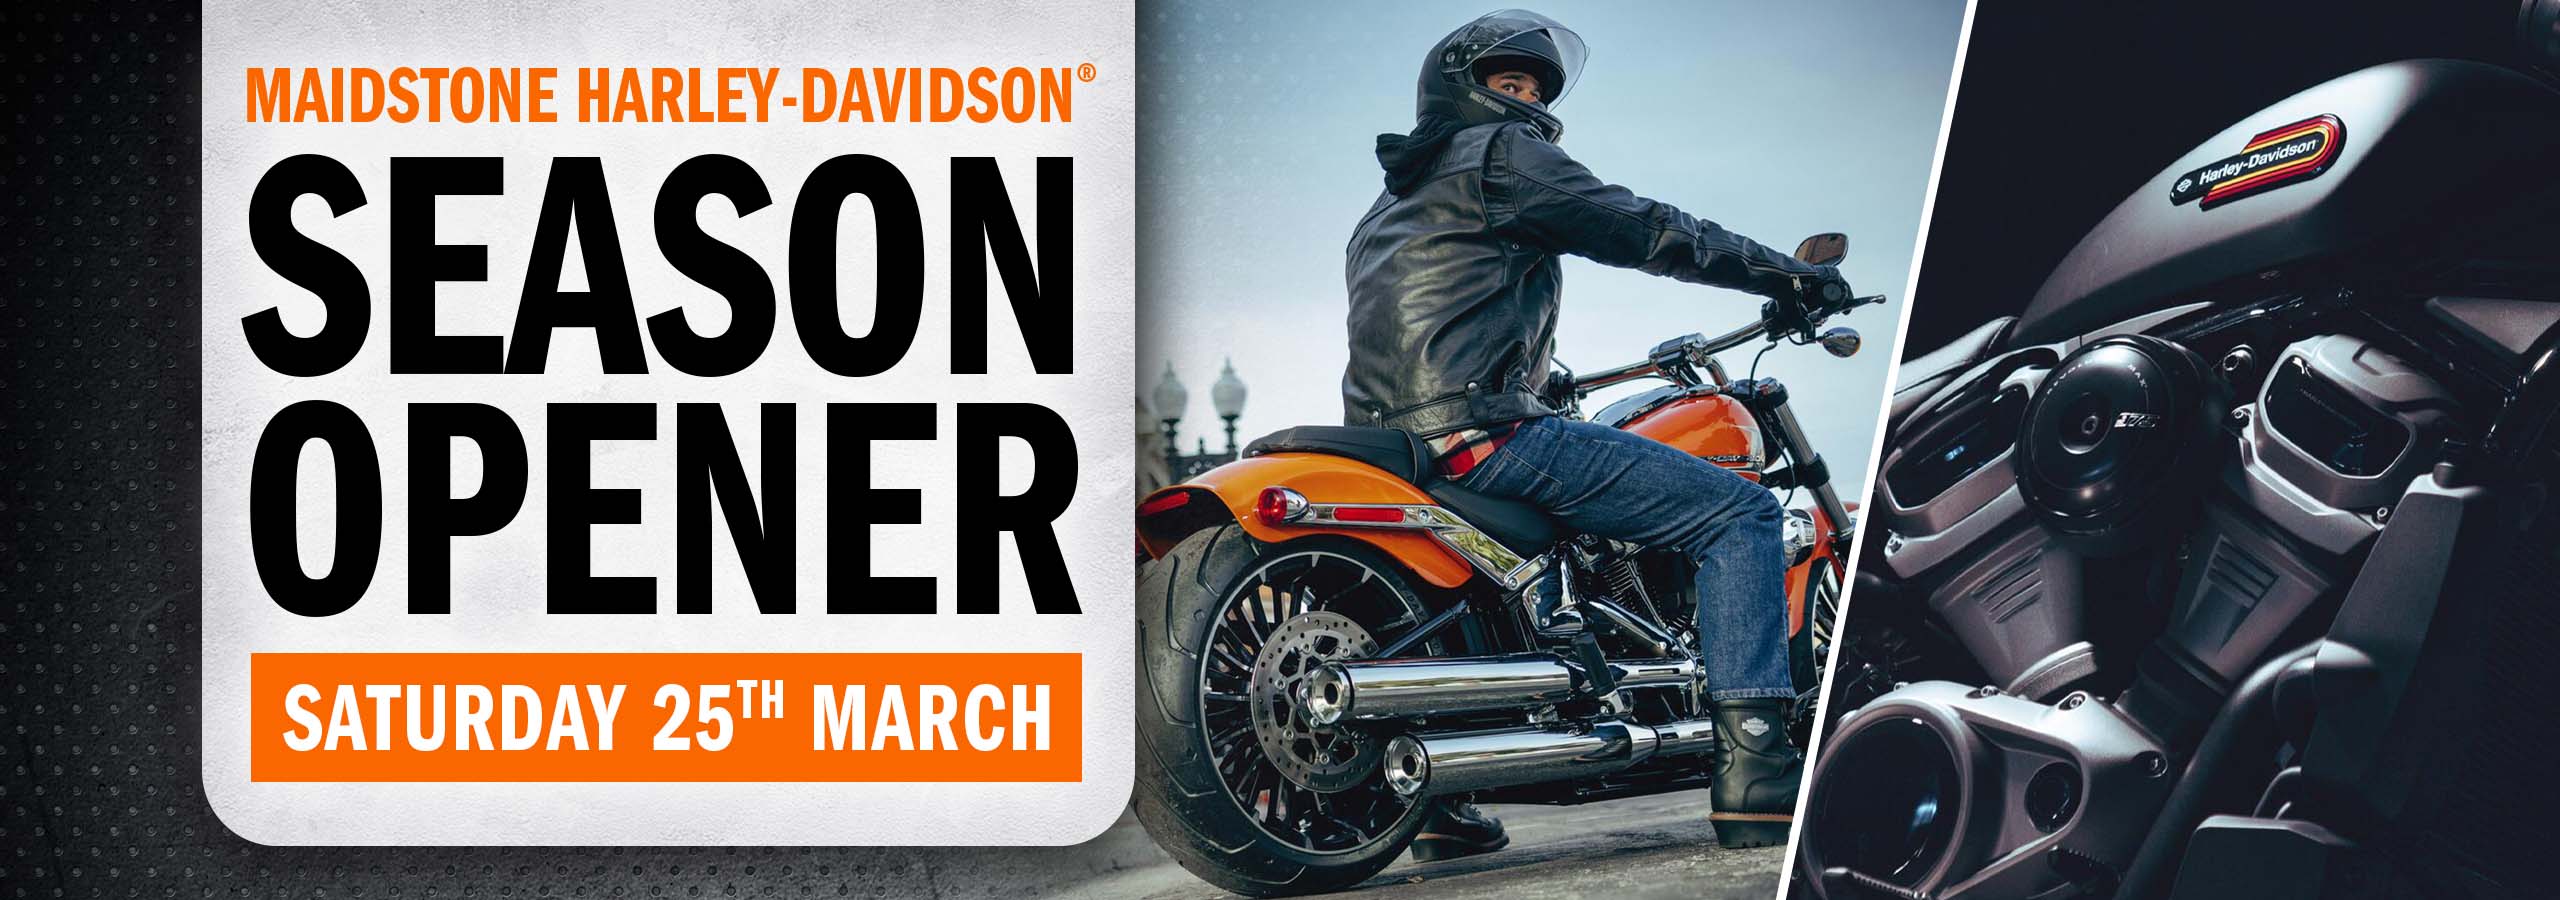 Maidstone Harley-Davidson Season Opener on Saturday the 25th of March